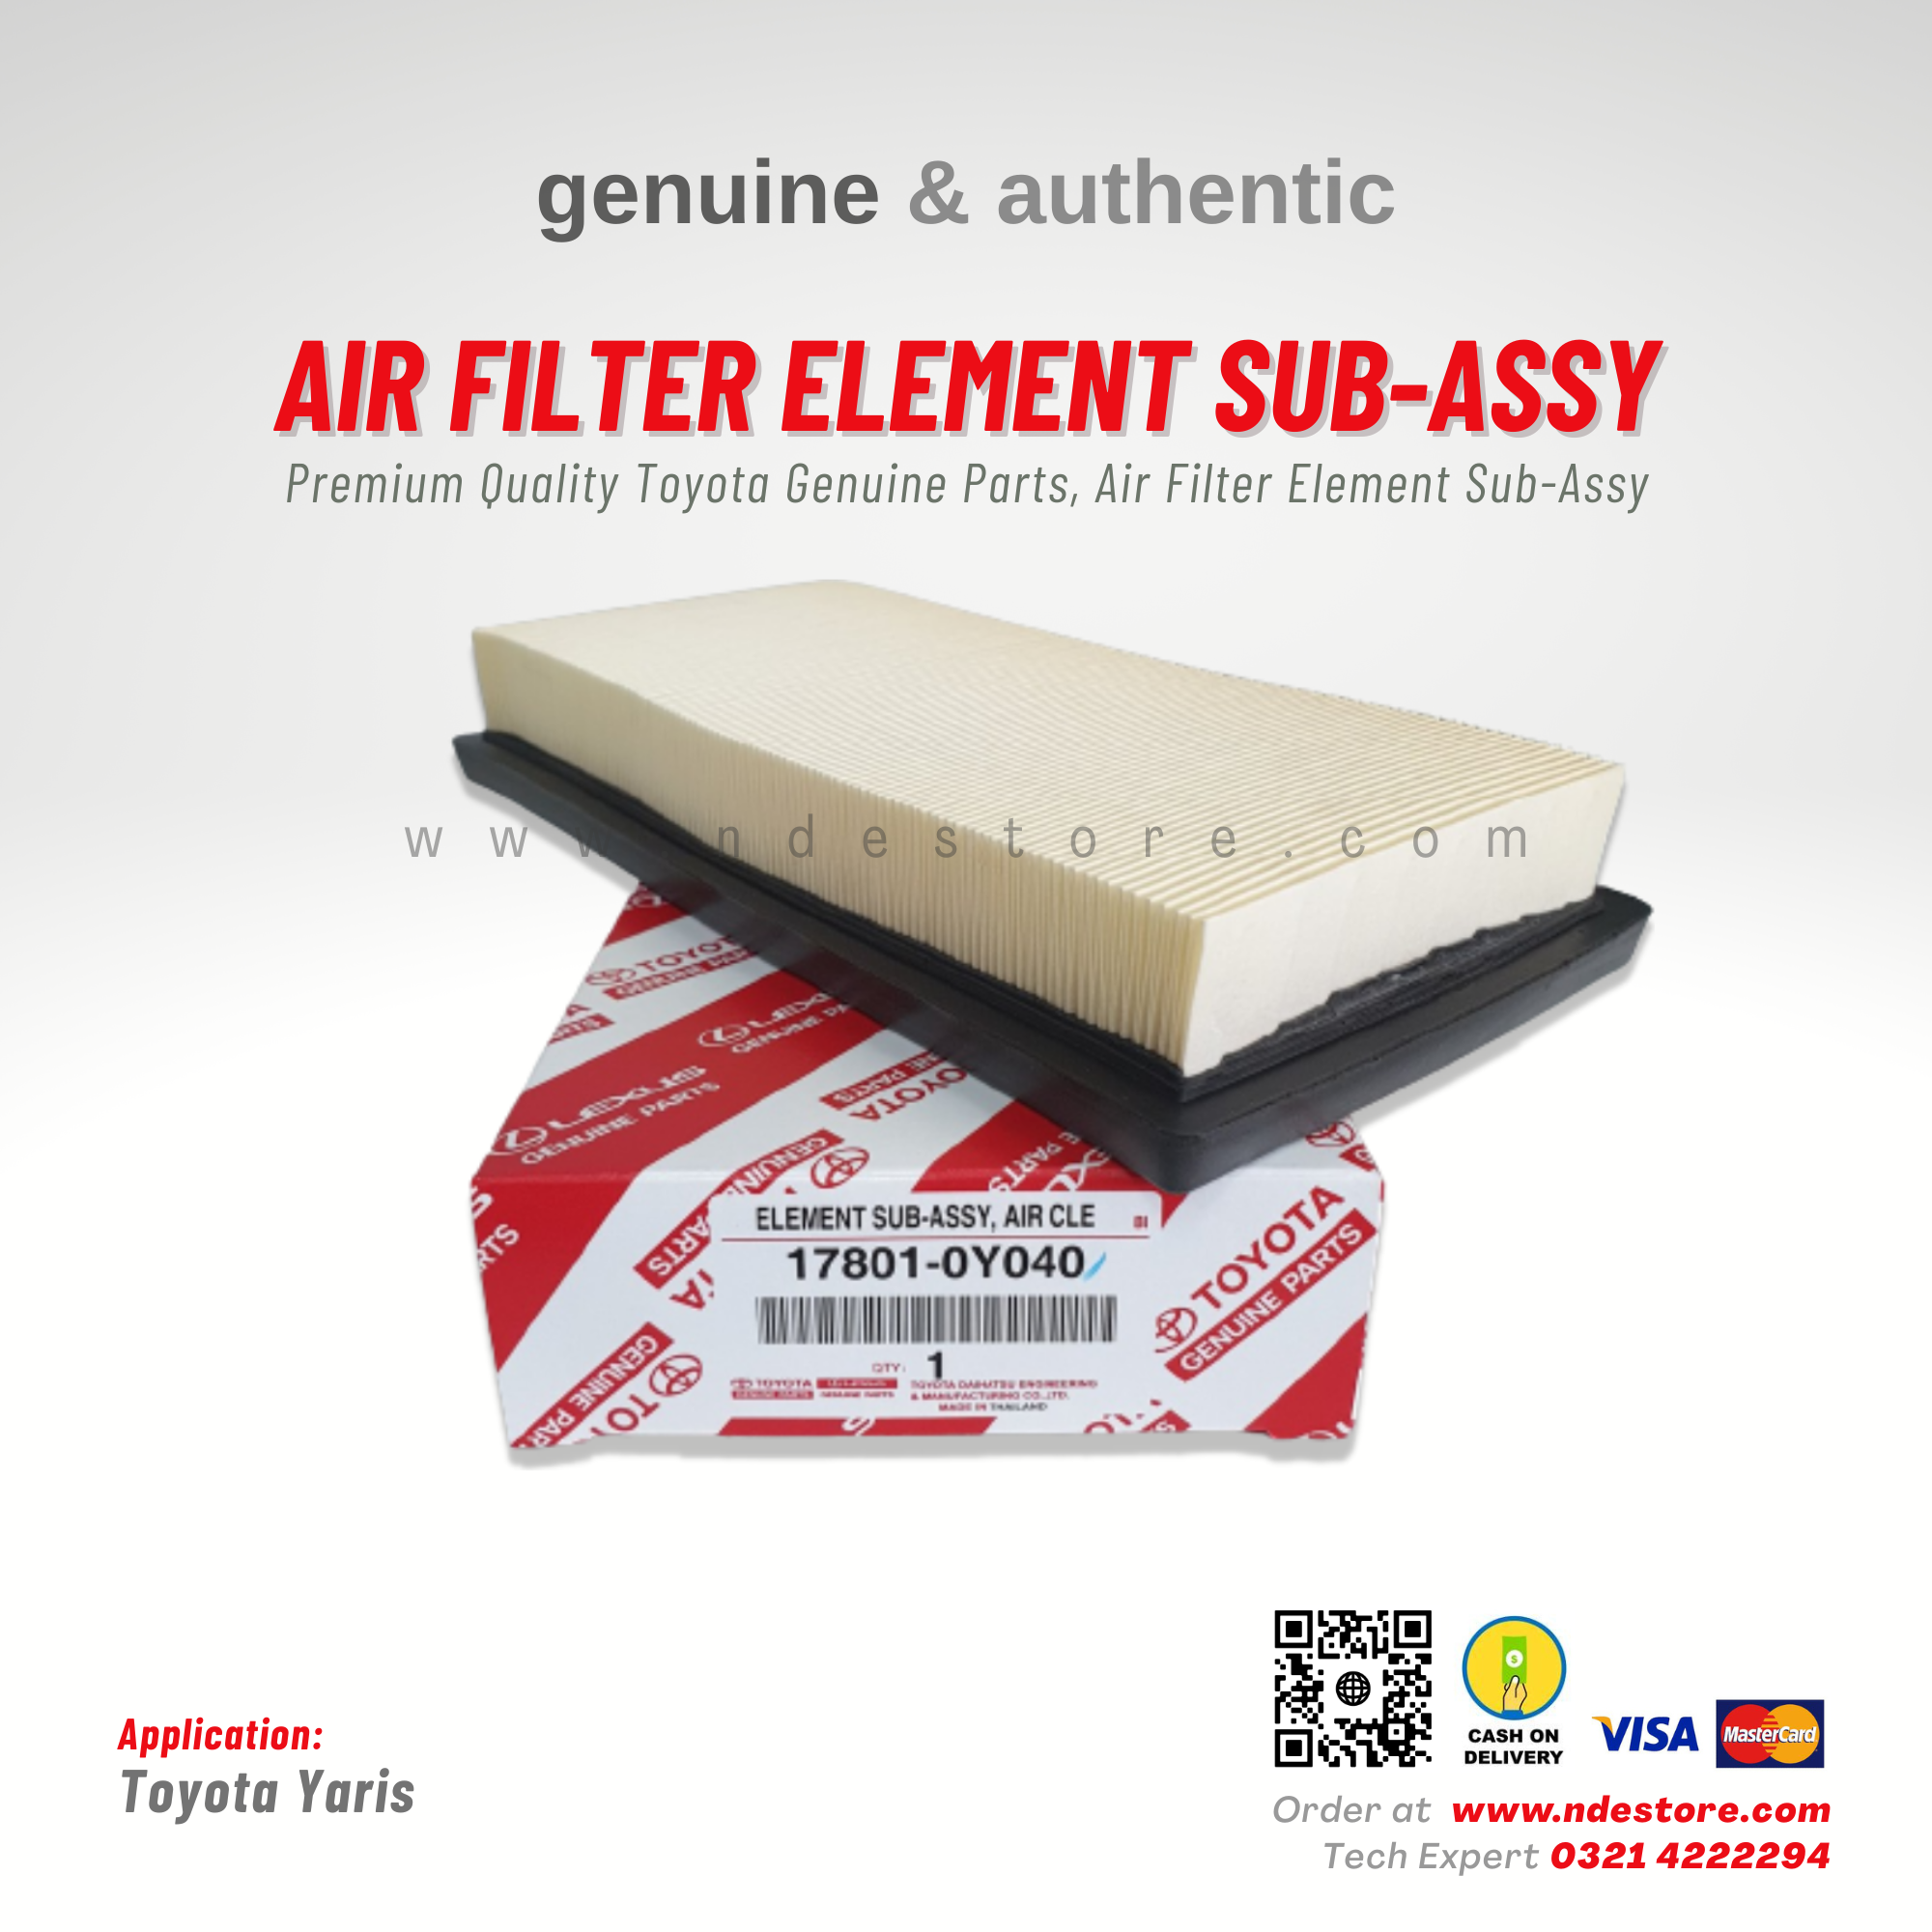 AIR FILTER ELEMENT SUB ASSY GENUINE FOR TOYOTA YARIS(TOYOTA GENUINE PART)